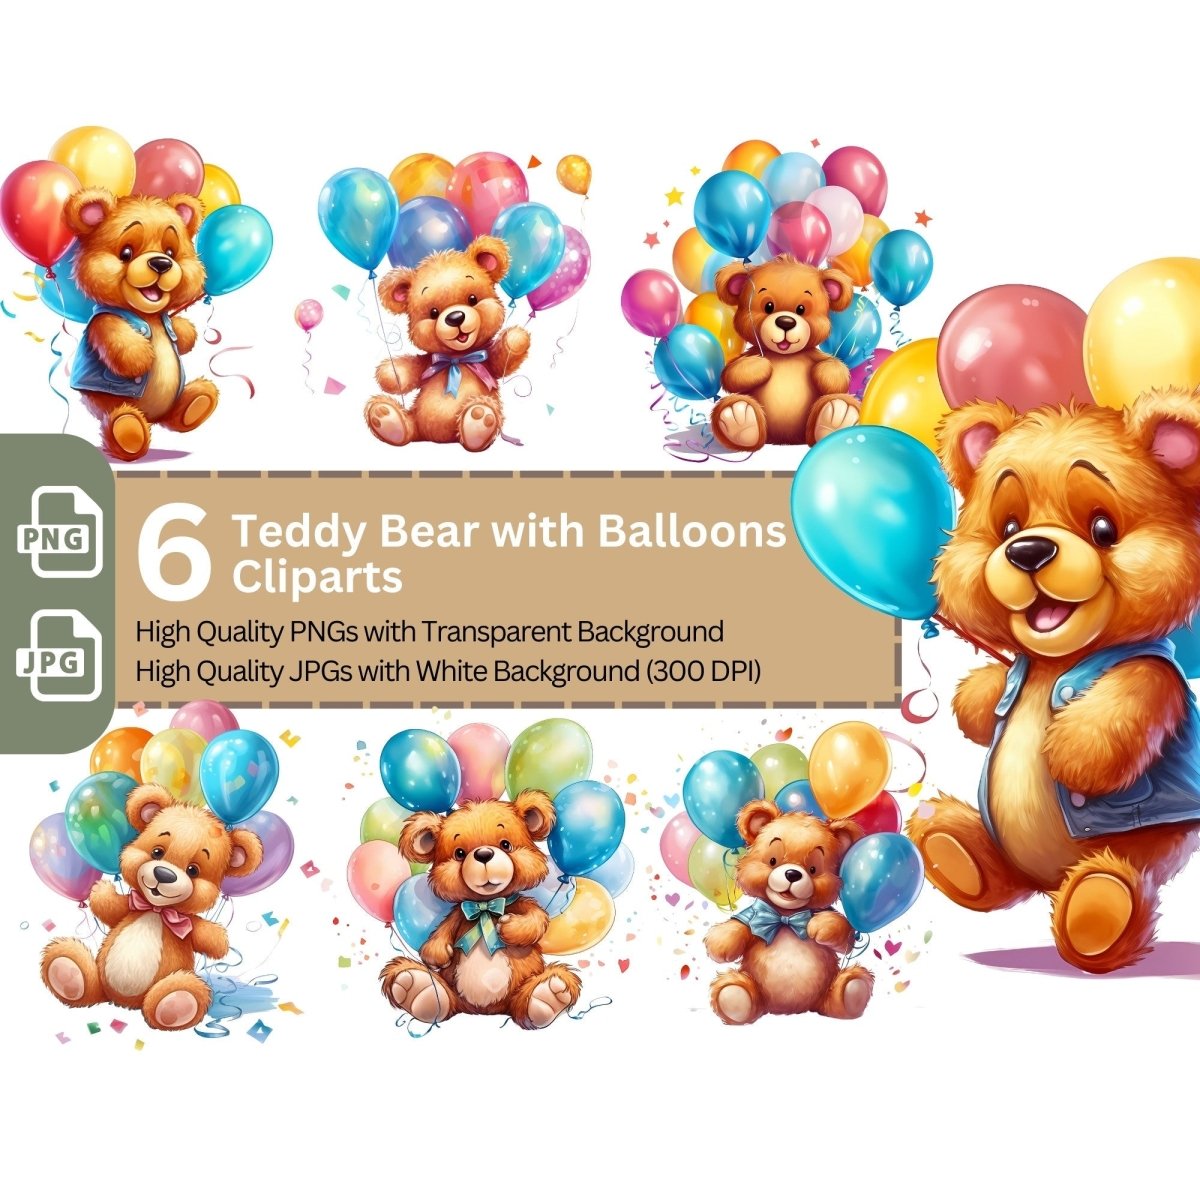 Cute Teddy Bear with Balloons 6+6 PNG Clip Art Bundle for Birthday - Everything Pixel